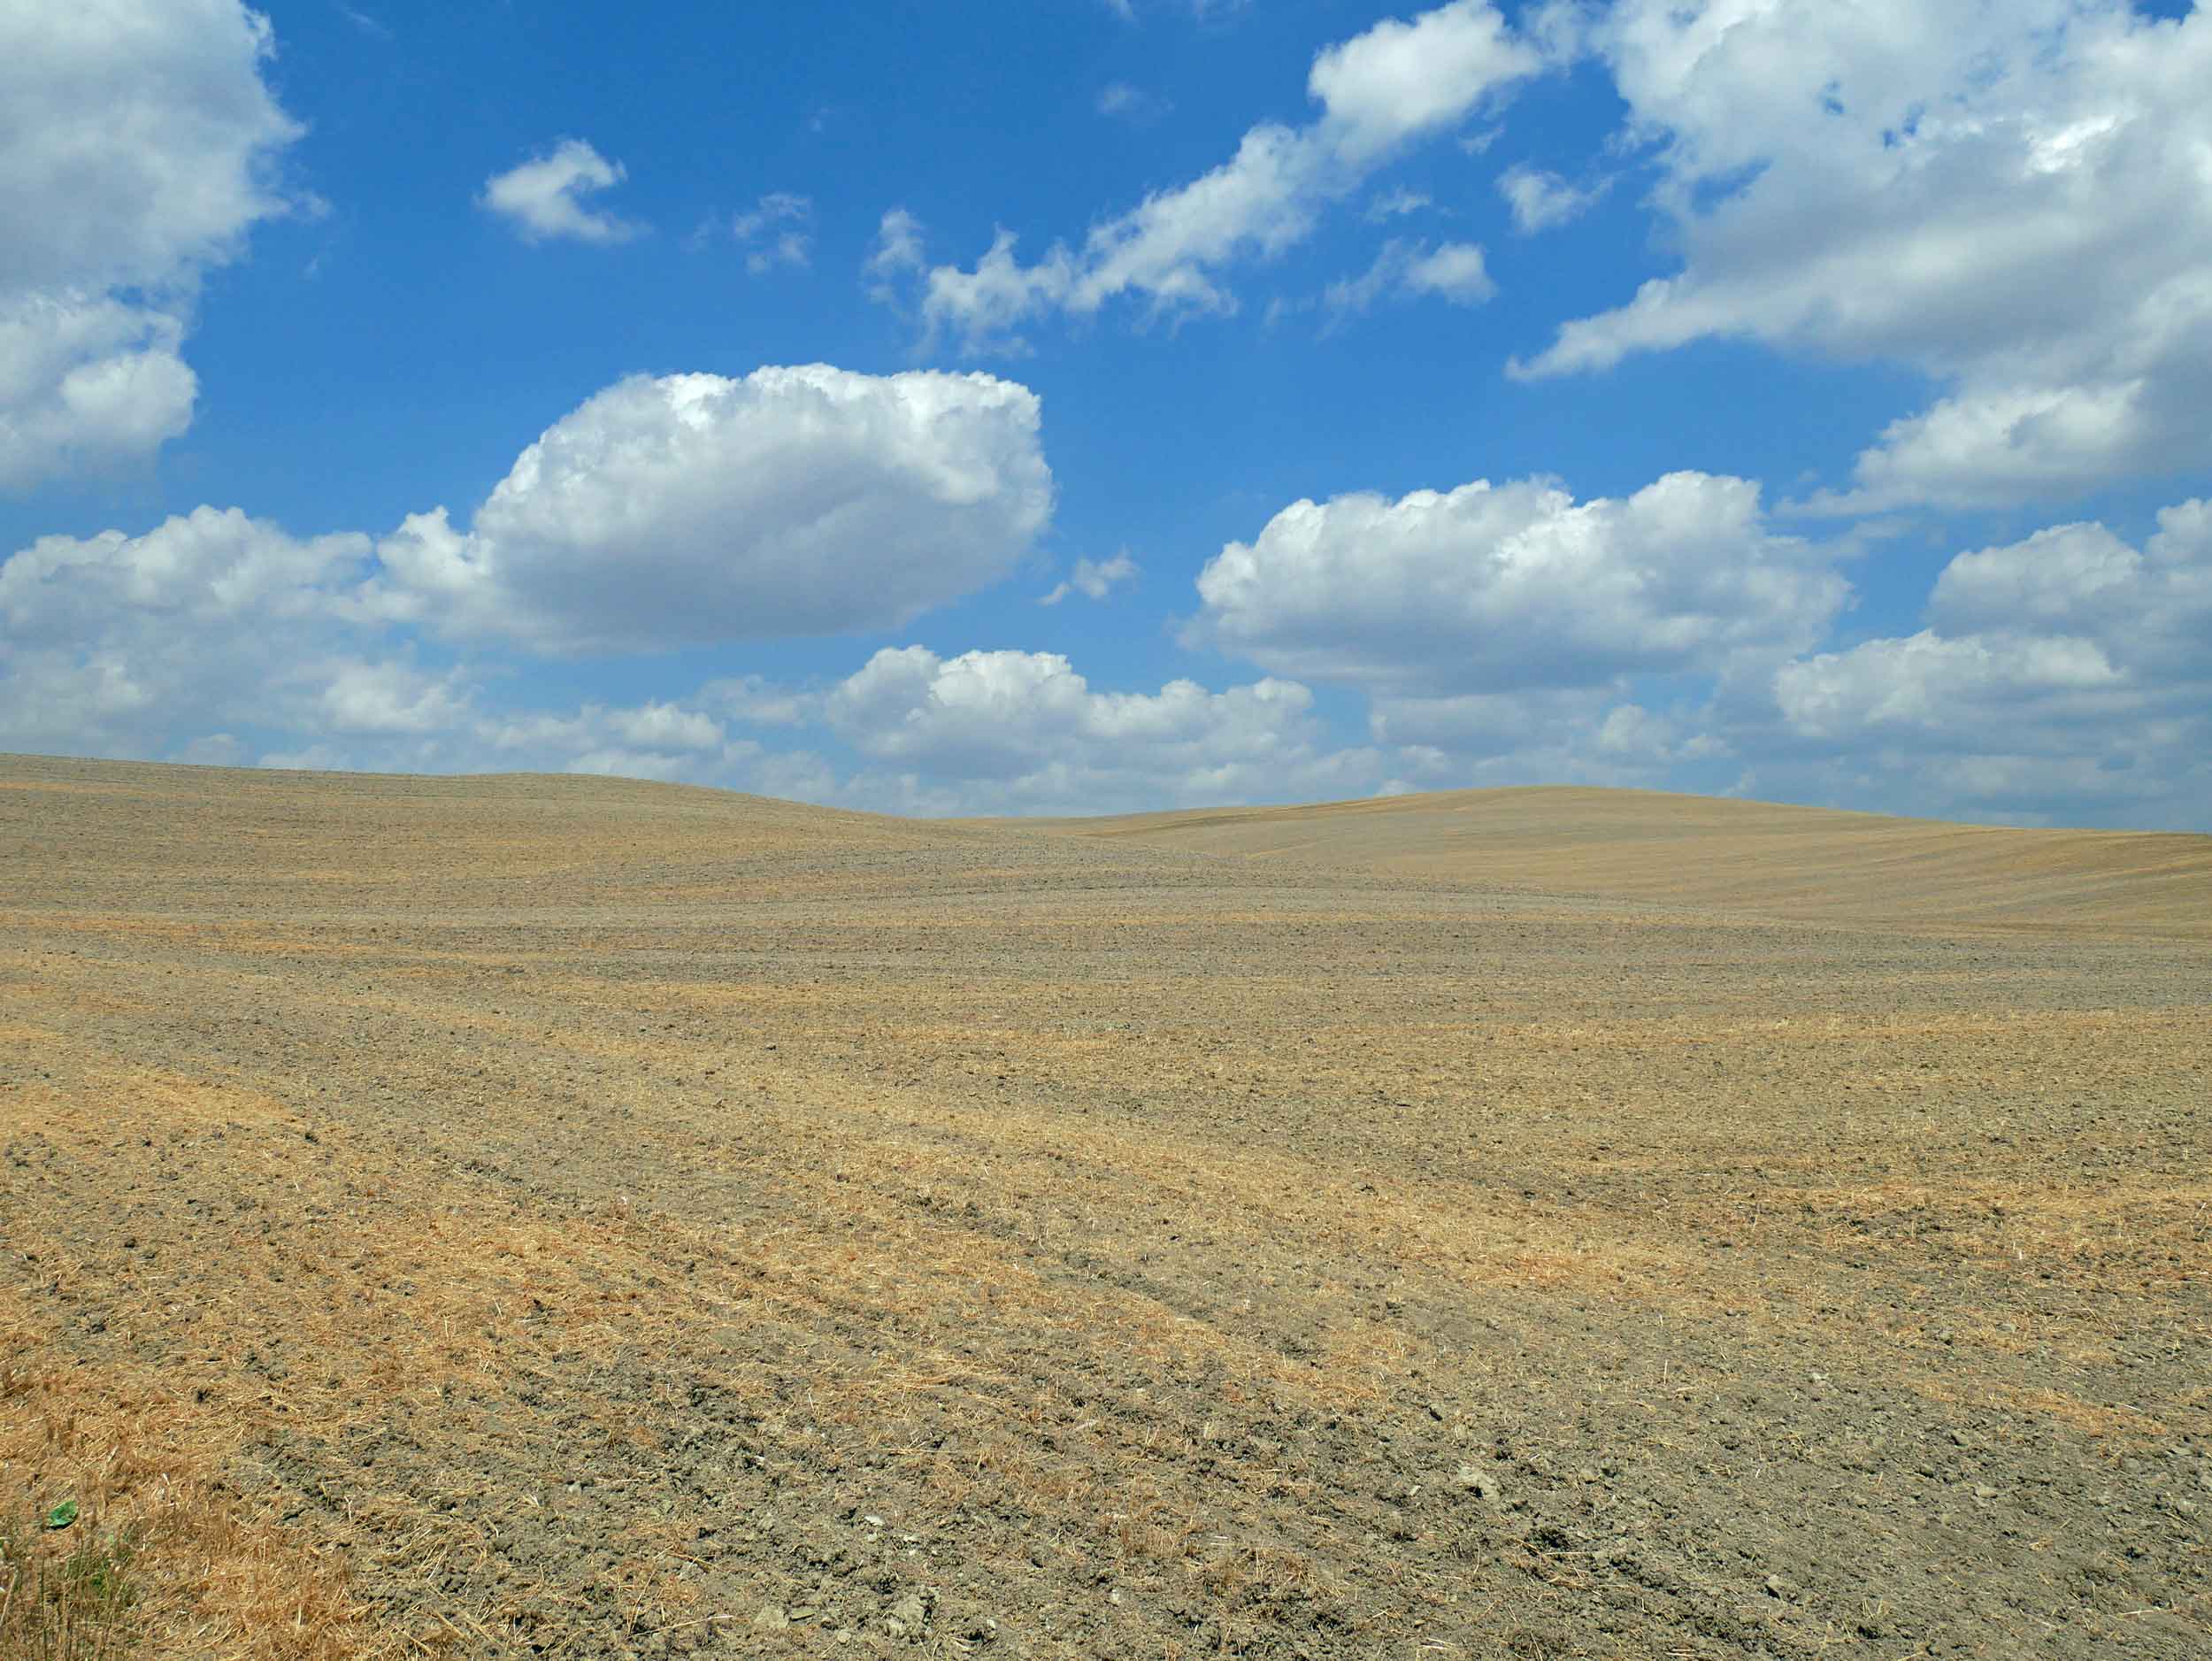  Big white fluffy clouds dotted the blue sky against yellowed fields,&nbsp;creating a real life Tuscan painting.&nbsp; 